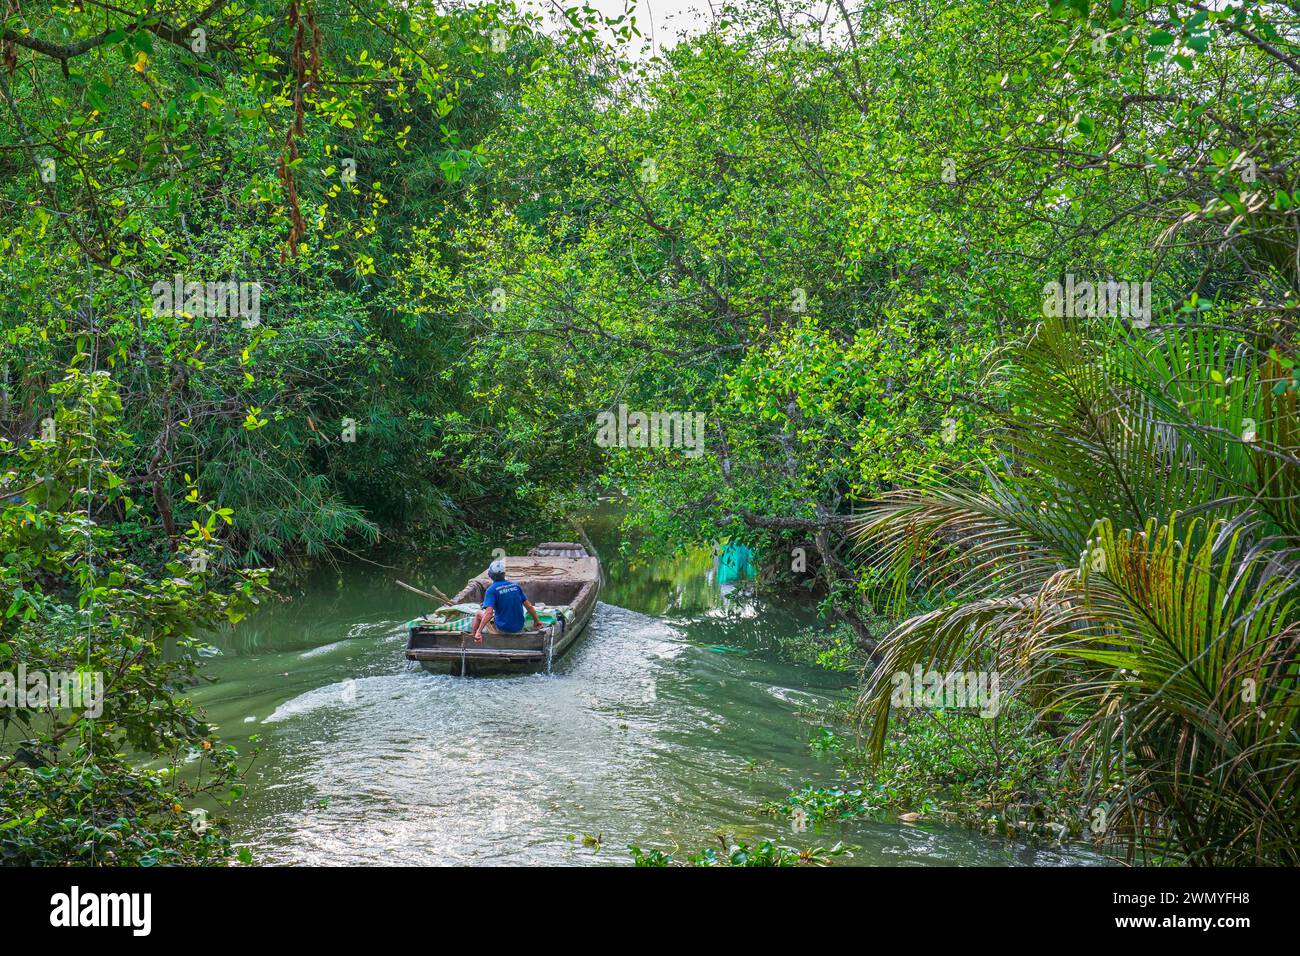 Vietnam, Mekong Delta, Tien Giang province, Tan Phong island, one of the many canals on the island Stock Photo